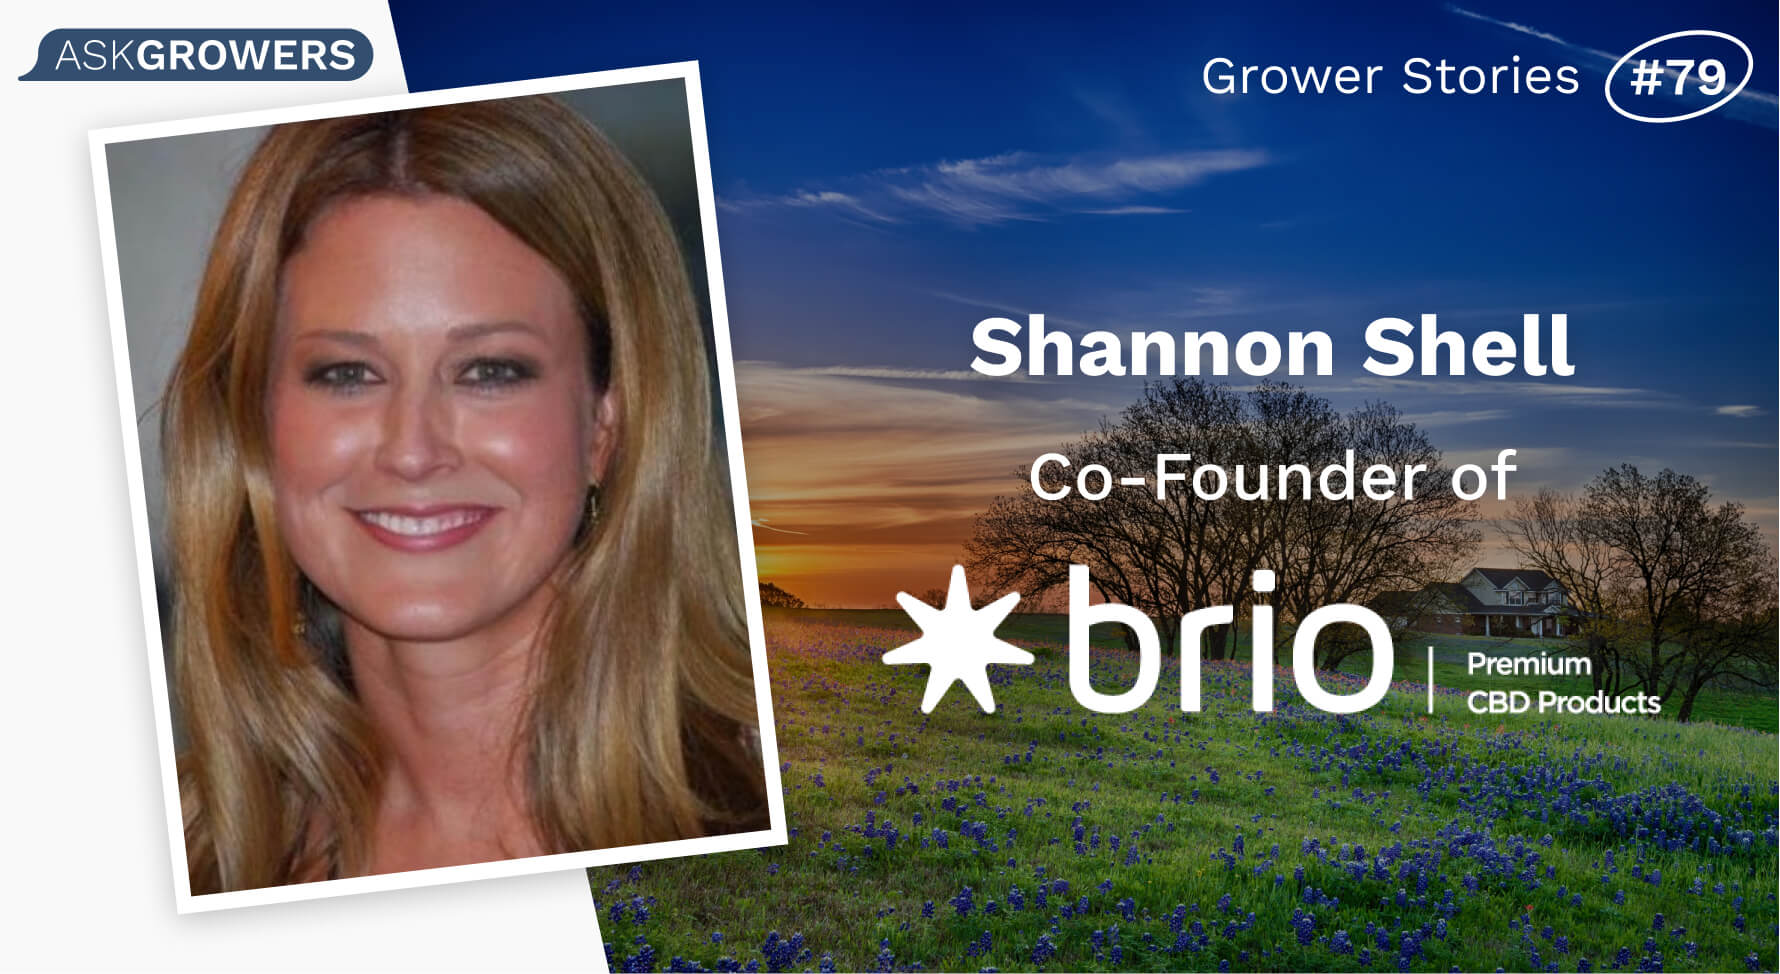 Grower Stories #79: Shannon Shell